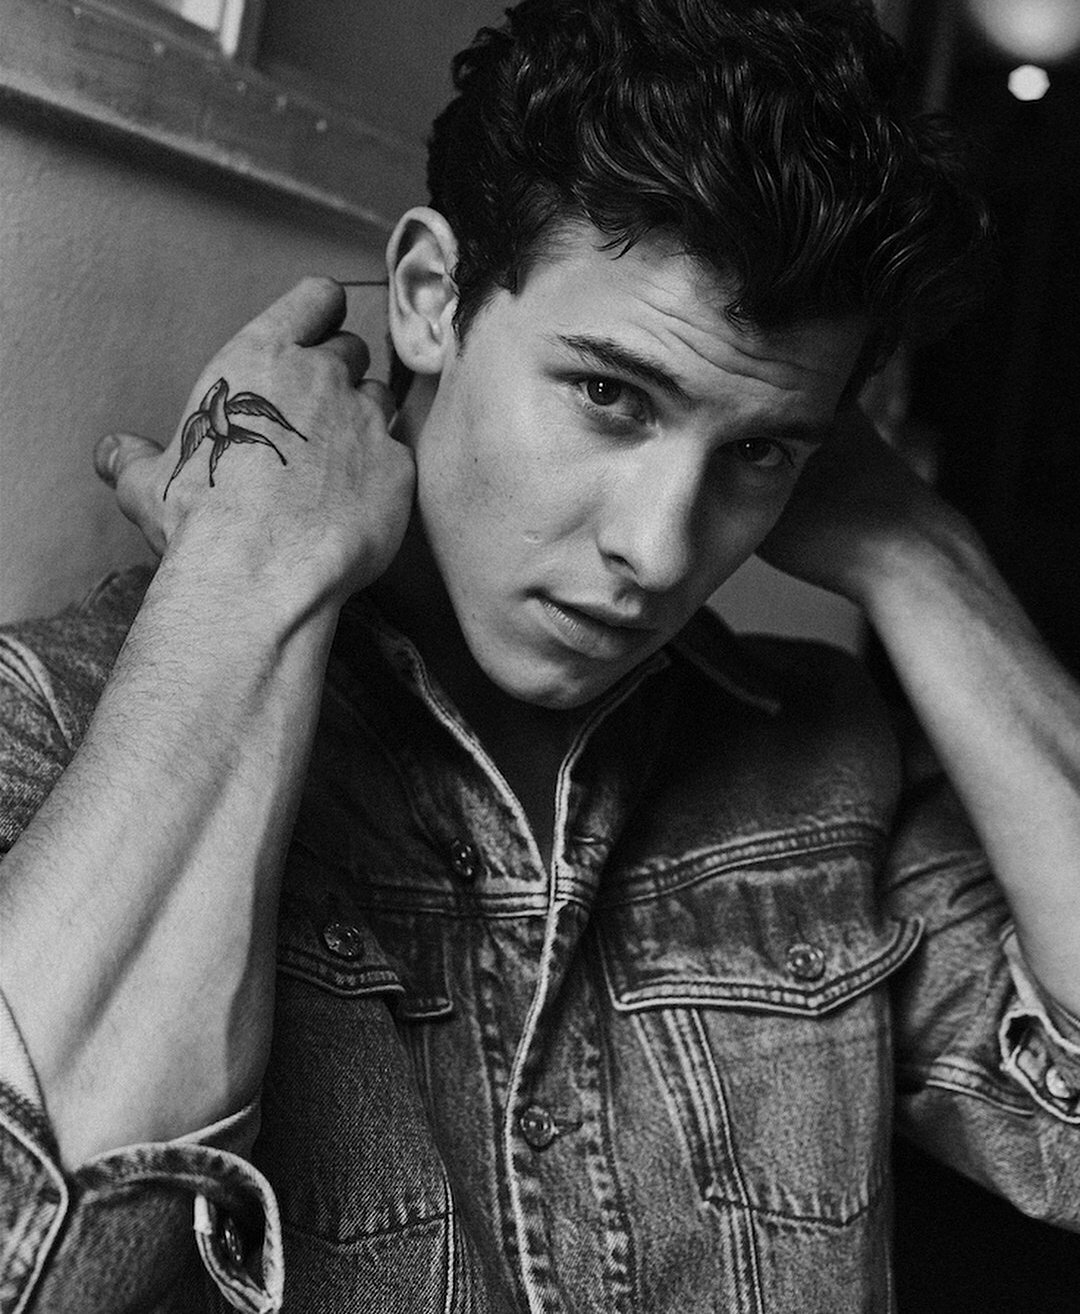 Wallpaper Shawn Mendes Wallpapers